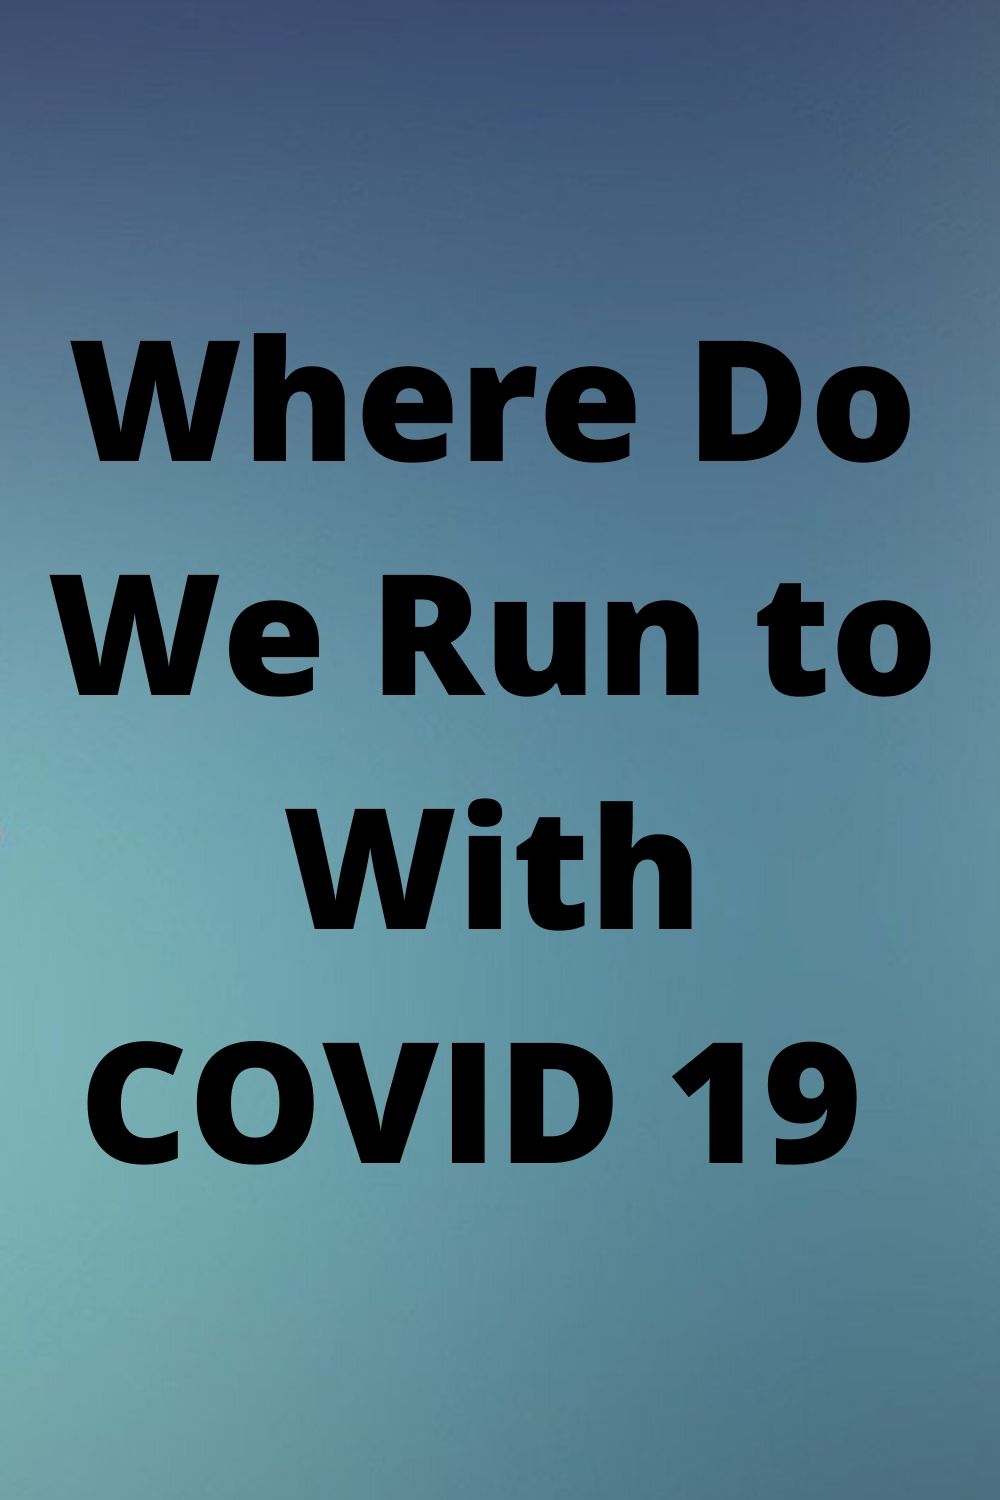 Lord: Where do we run to with COVID 19